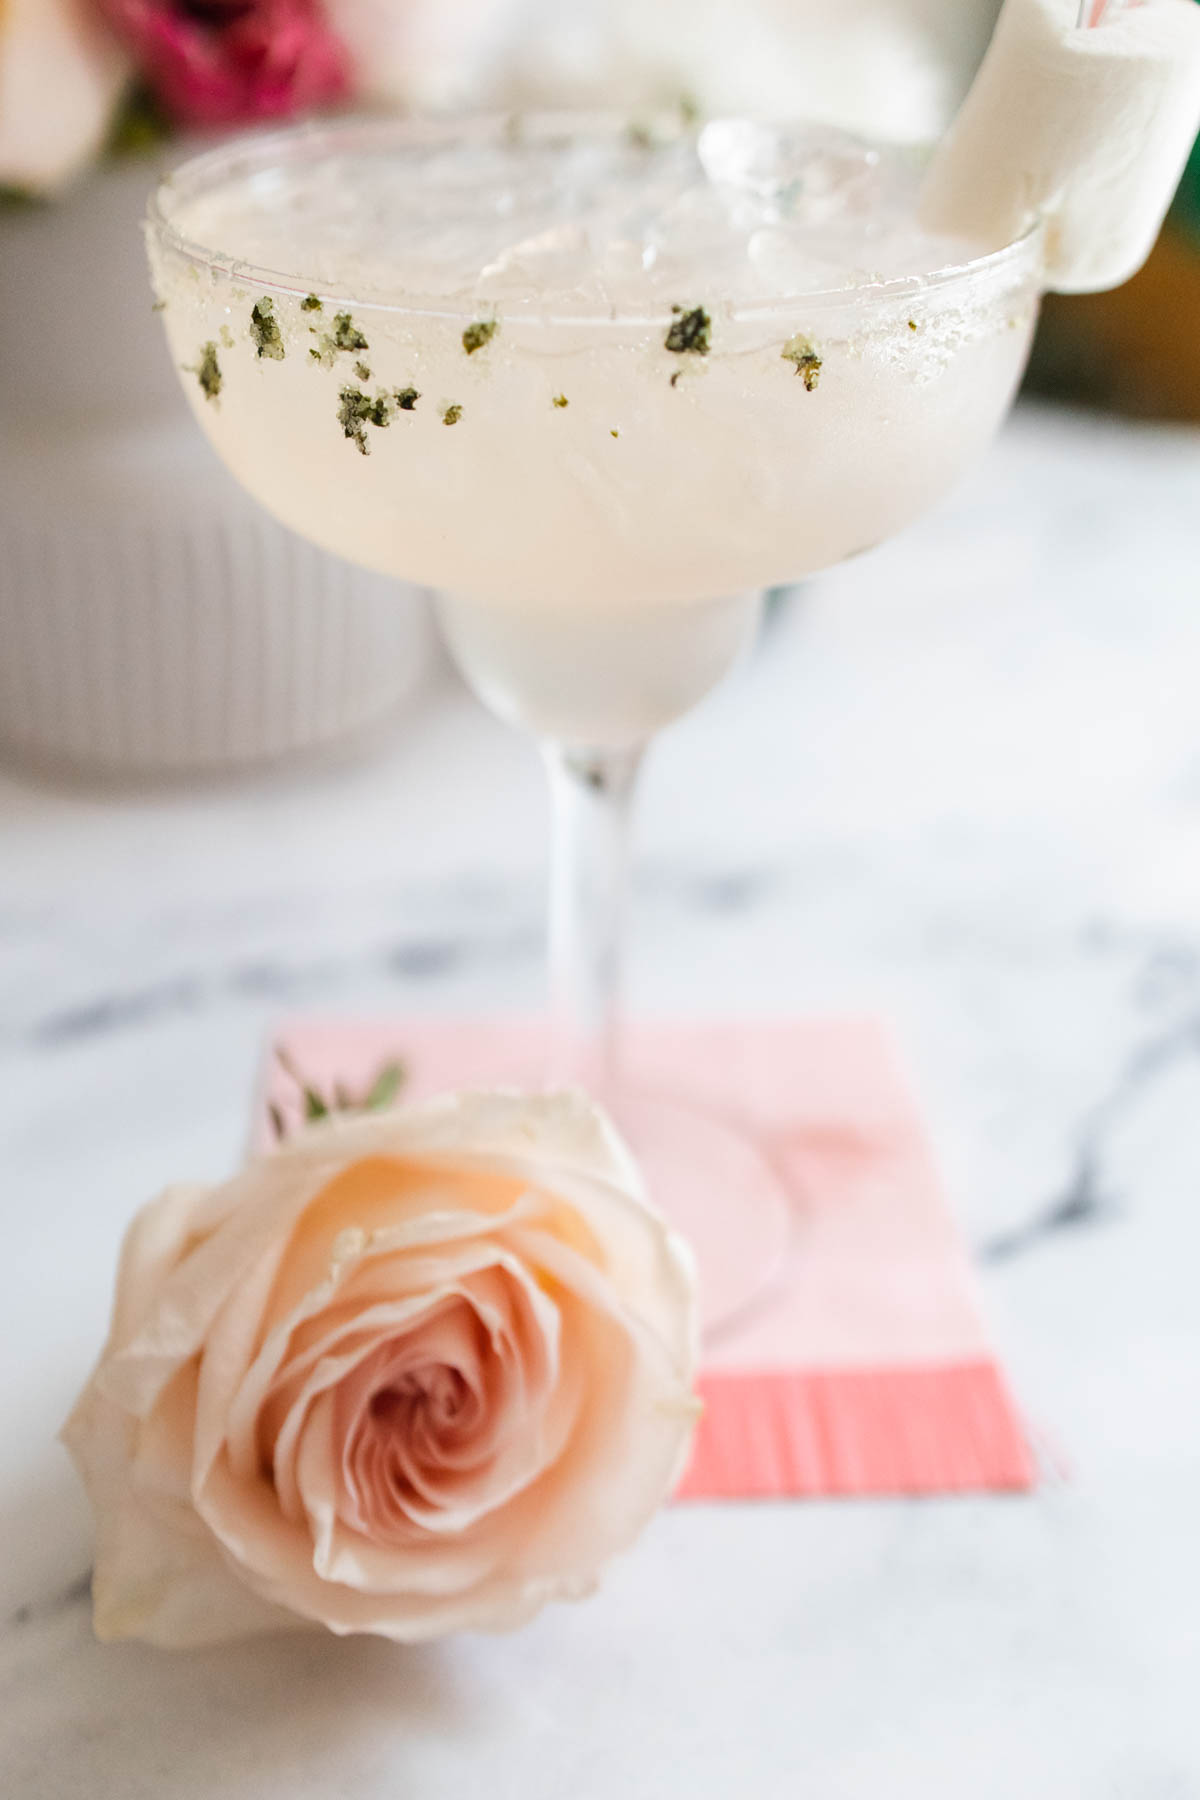 A close up of a margarita glass with a basil sugar rim on a table next to a pink rose.